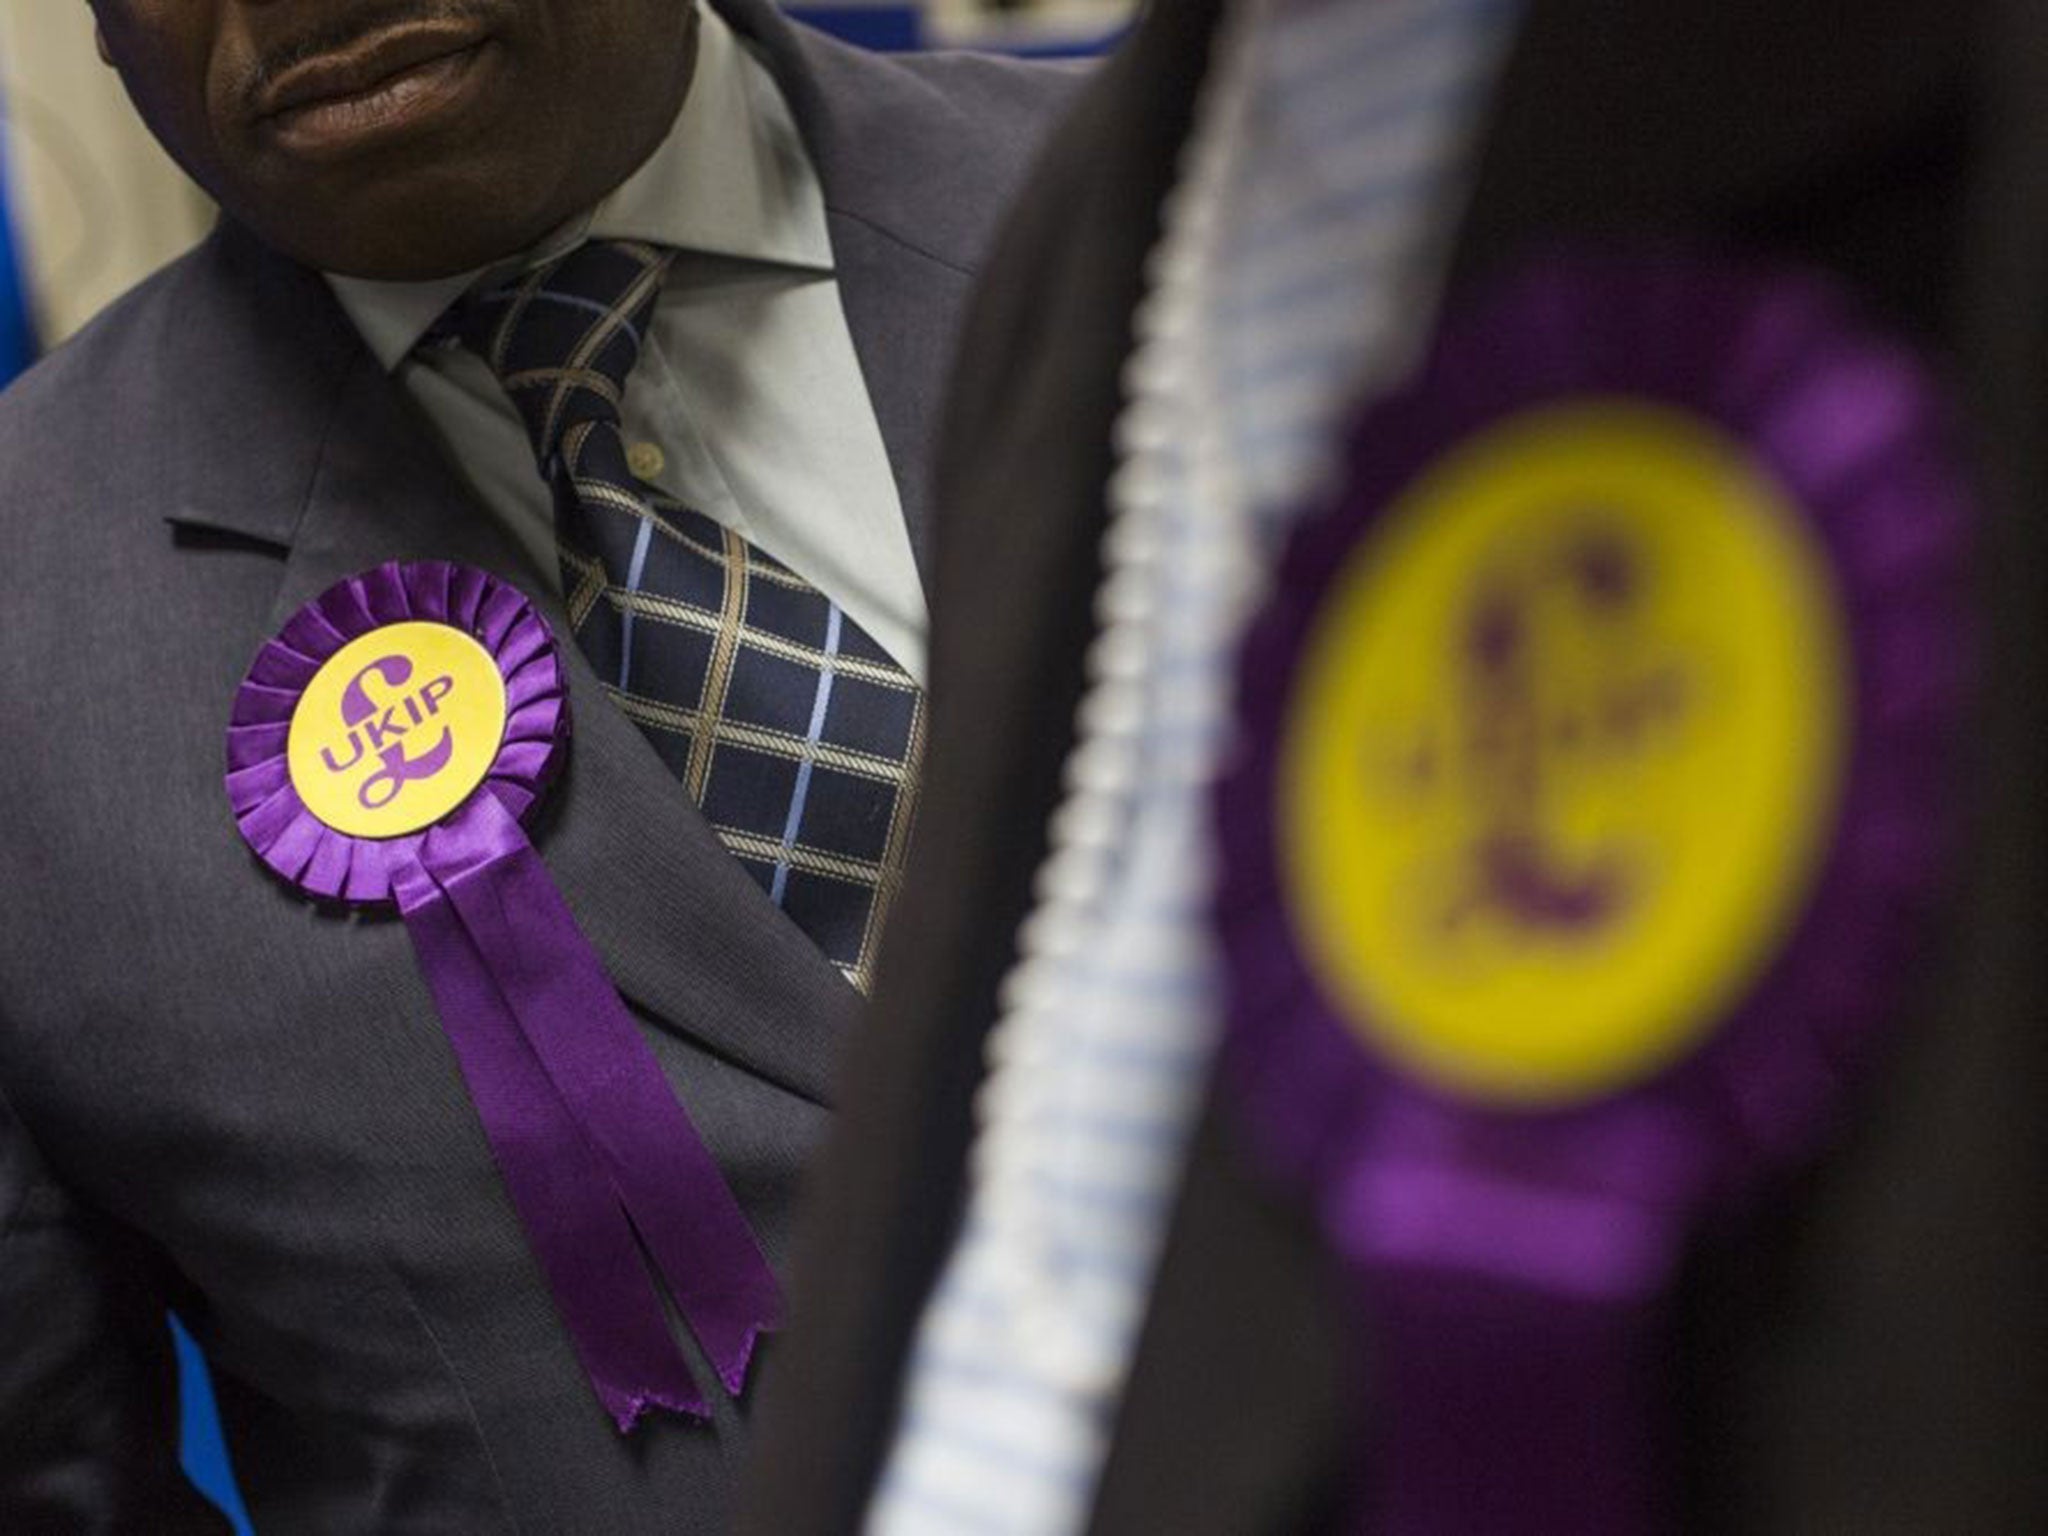 Stunning results in southern councils appeared to indicate that Essex Man was increasingly voting Ukip